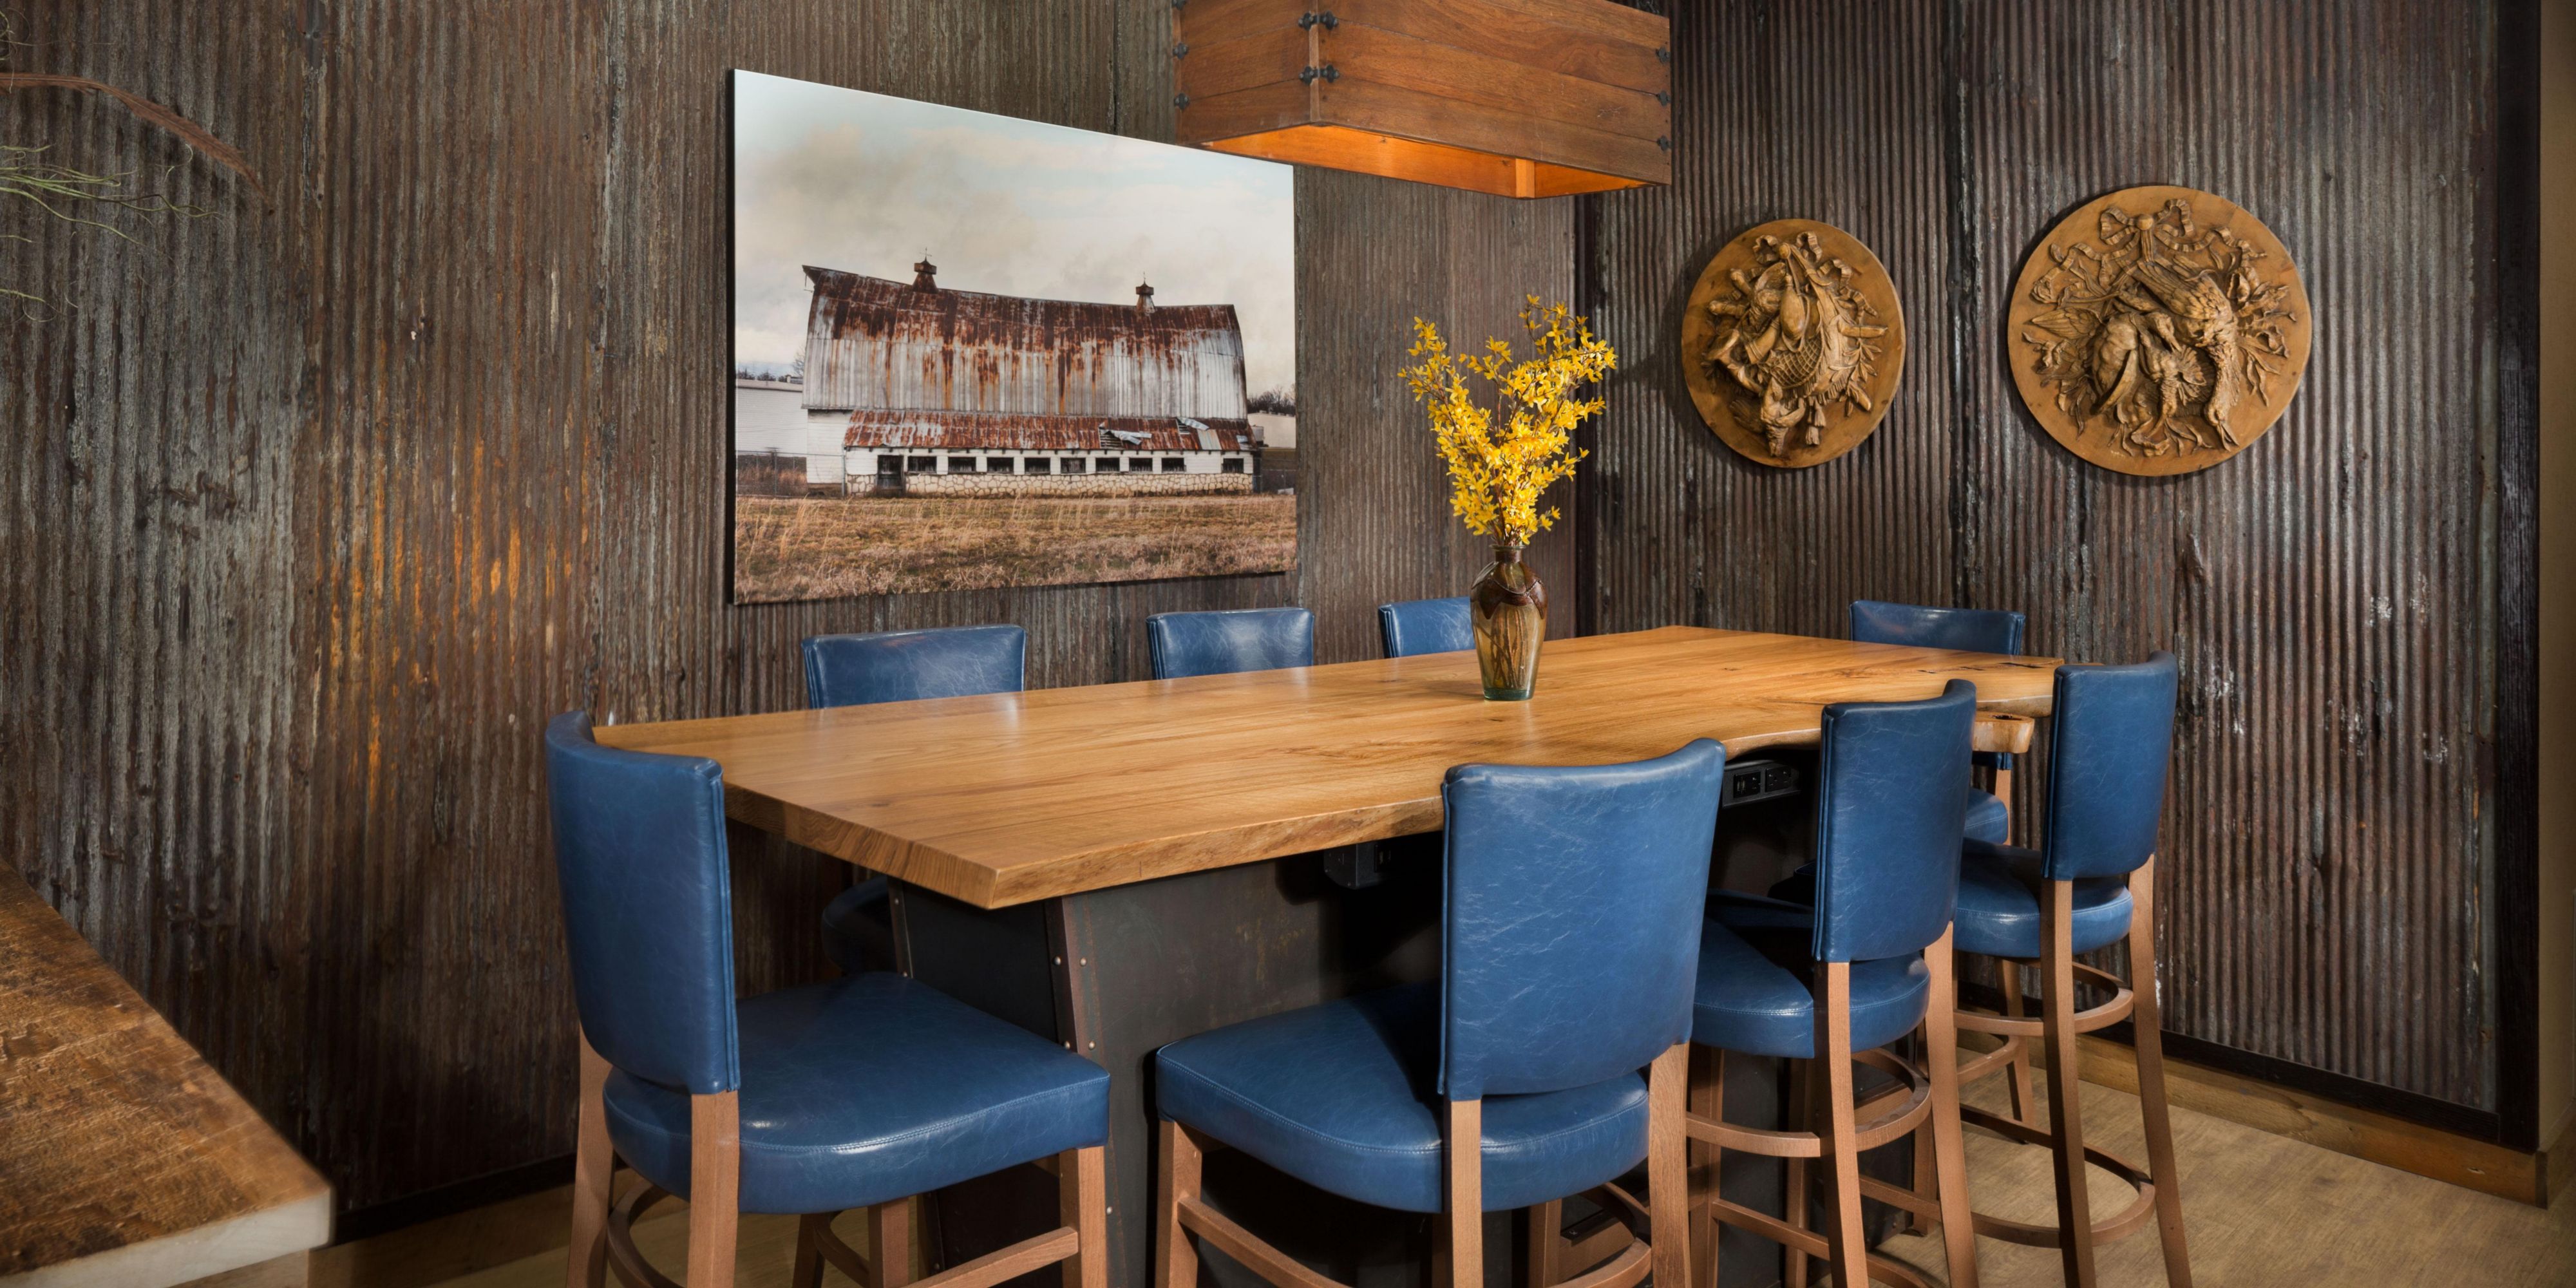 Our high-top table is a local favorite for friends and family.